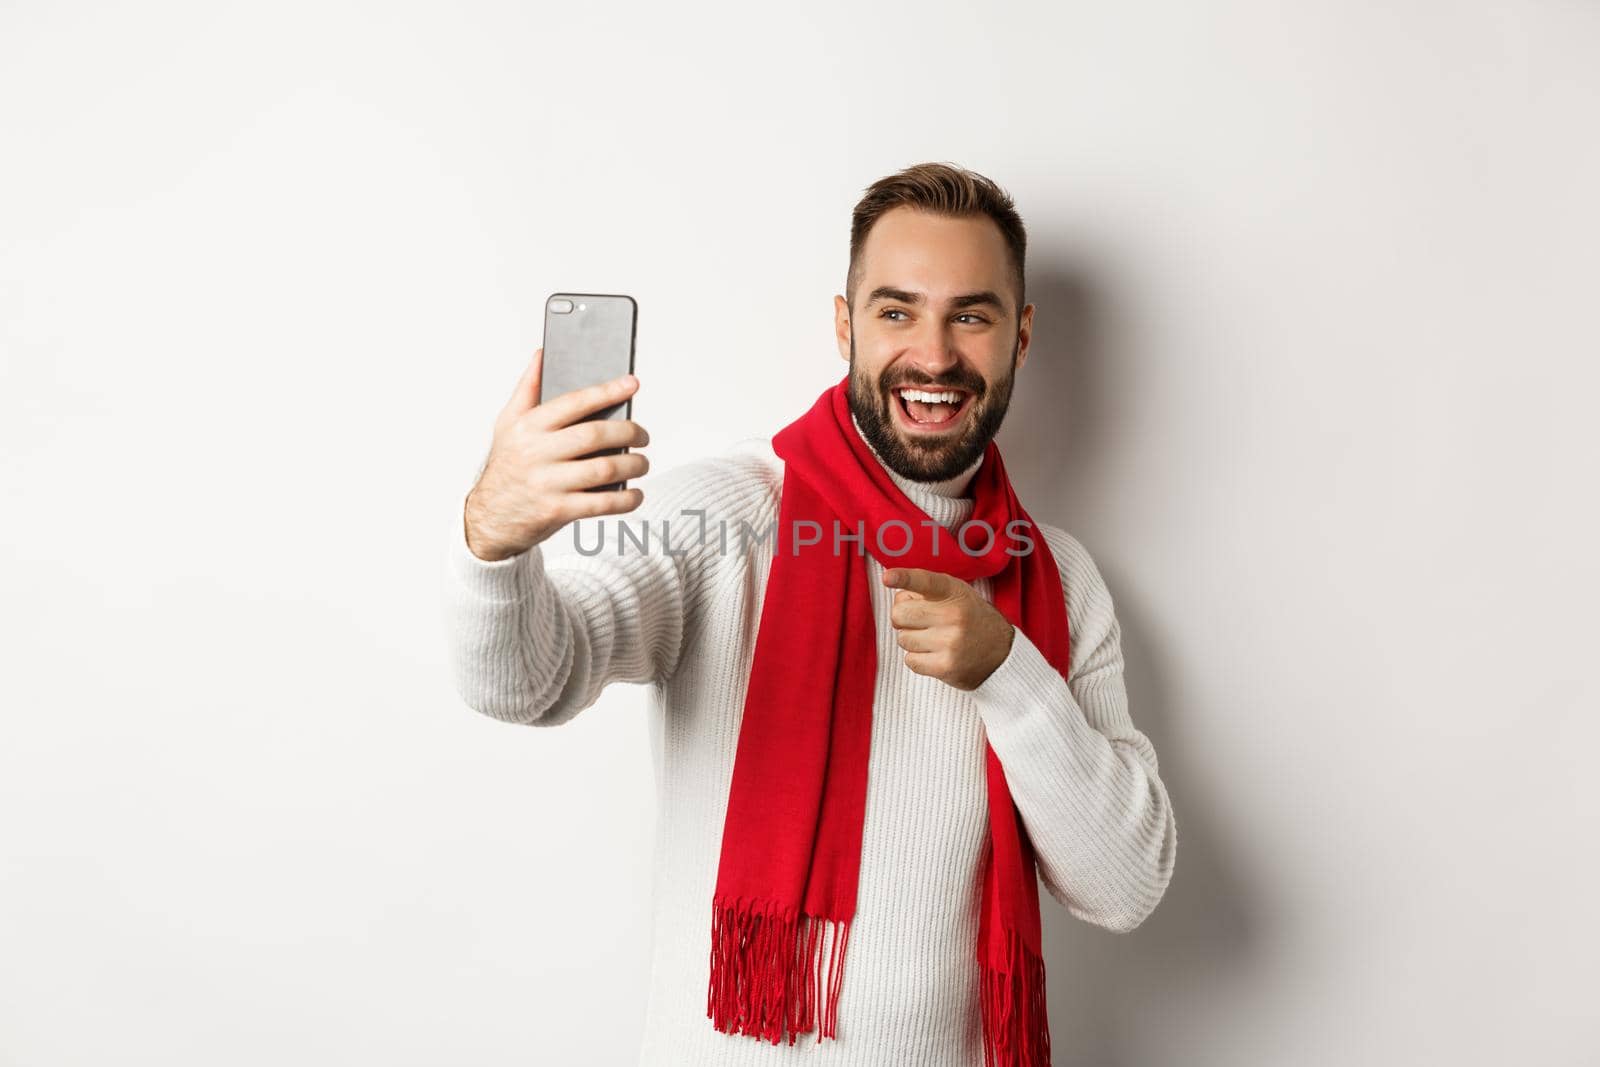 Handsome guy wishing merry christmas on video call, waving hand at mobile phone and smiling, standing in sweater with red scarf, white background.